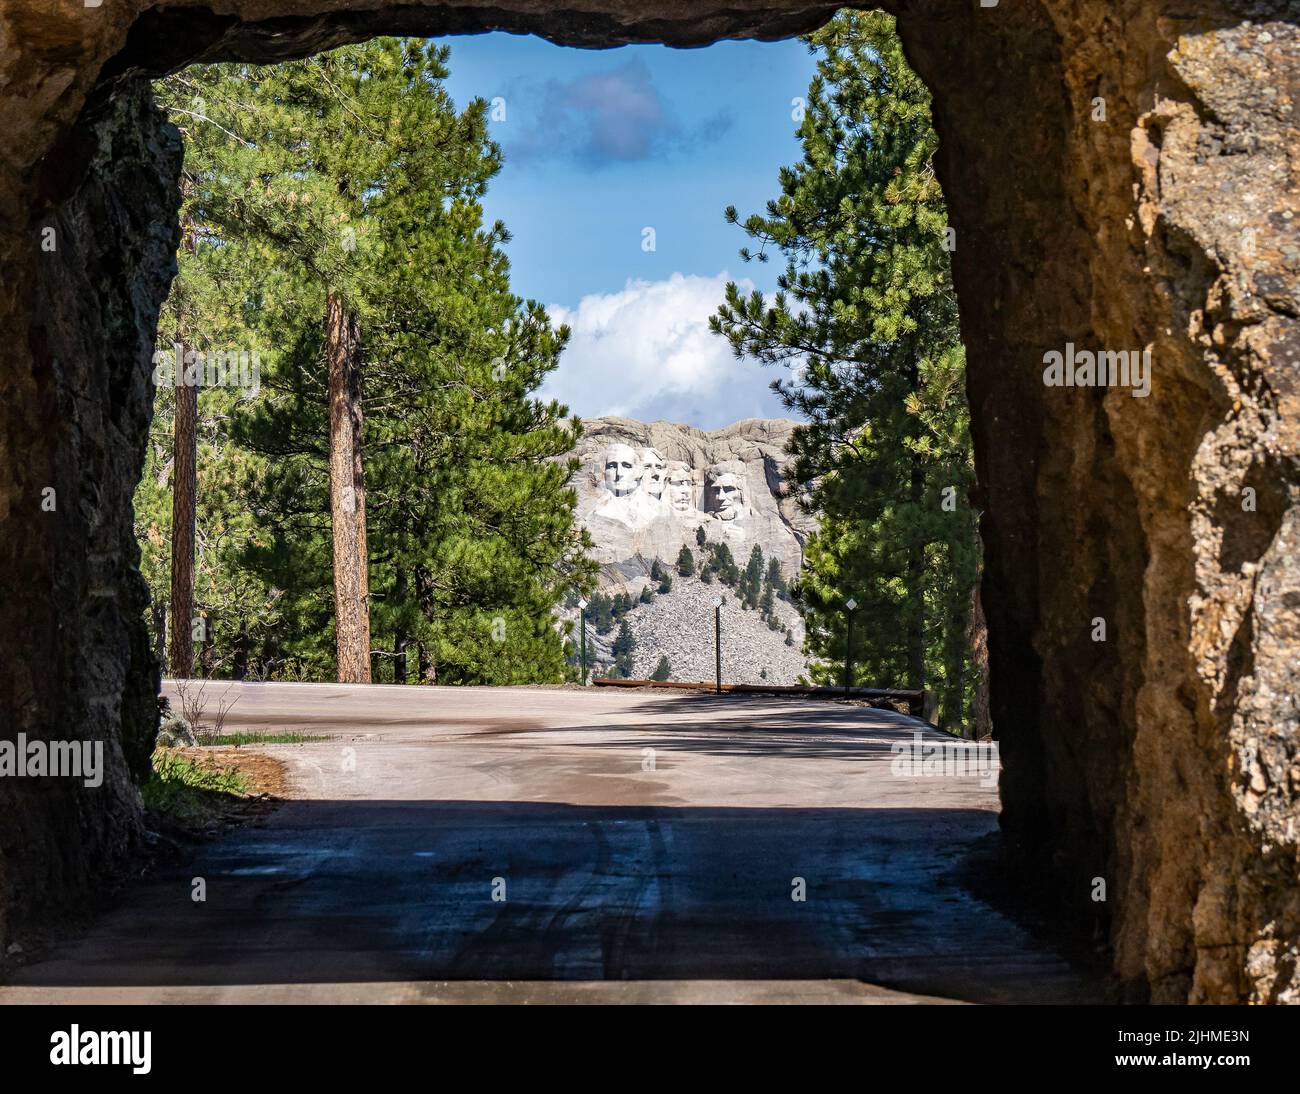 Mount Rushmore National Memorial durch den Scovel Johnson Tunnel an der Iron Mountain Road, Teil der Peter Norbeck National Scenic Byway im Black H Stockfoto